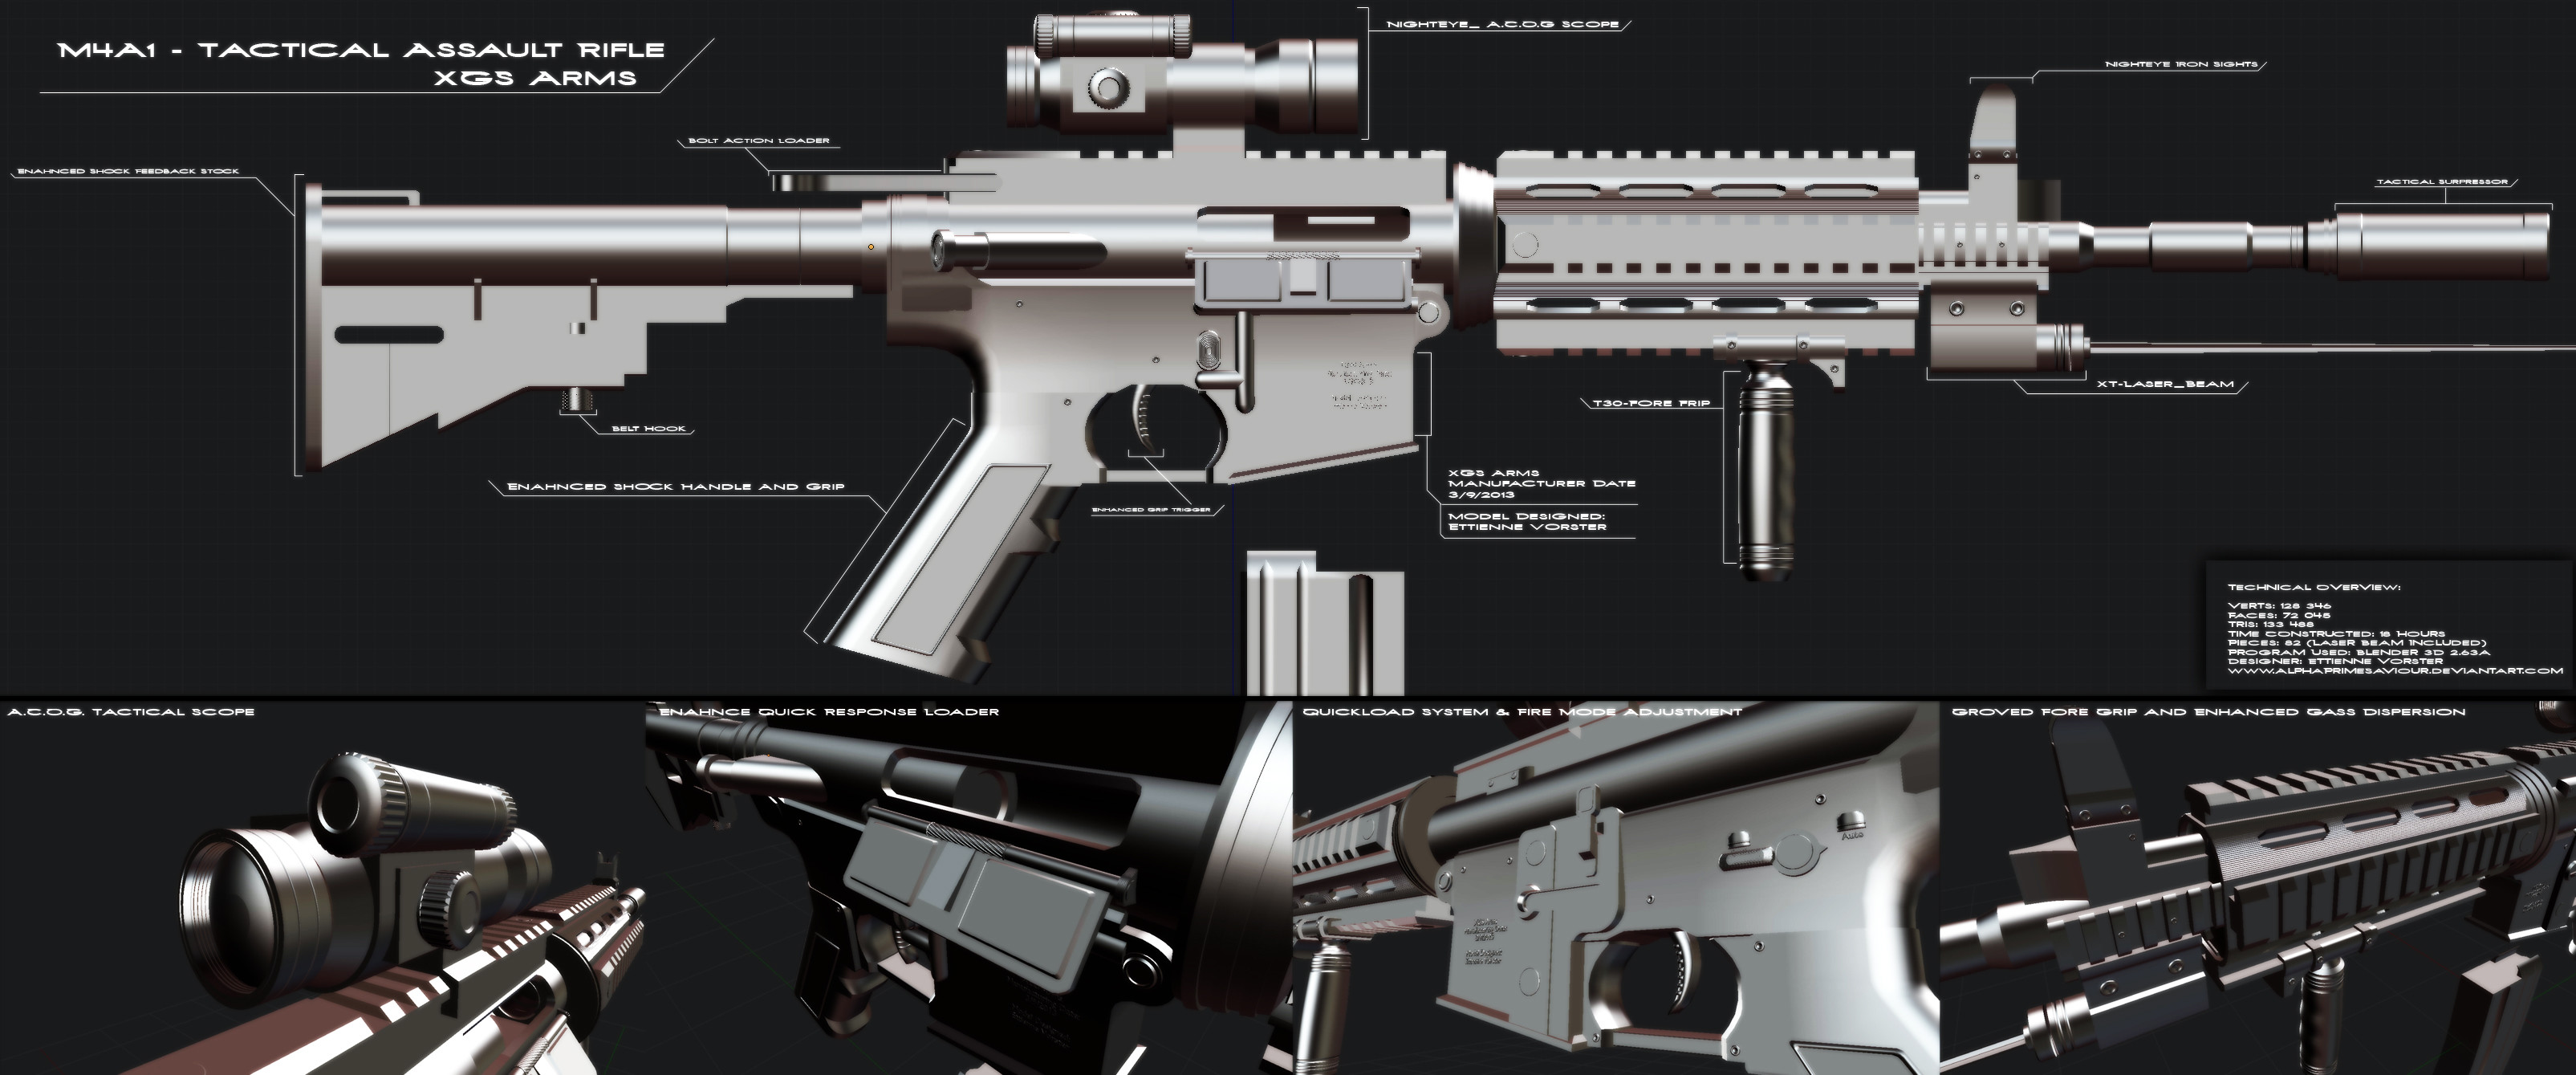 3210x1339 M4A1 weapon gun military rifle police poster y wallpaper |  |  192611 | WallpaperUP